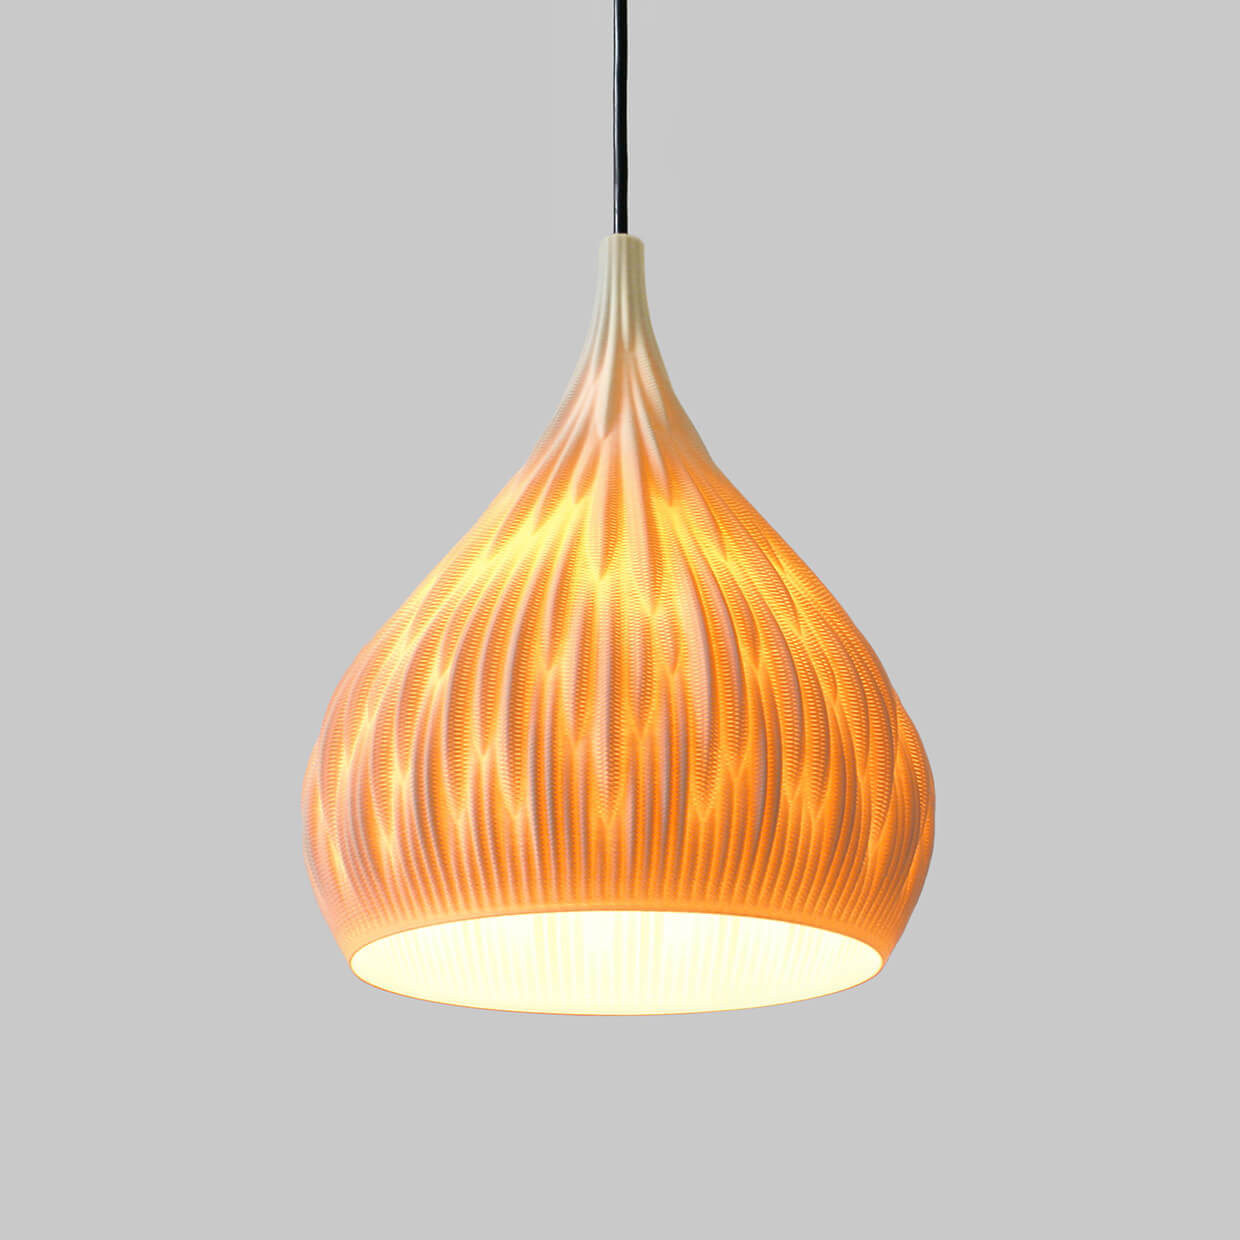 Flax 3D Printed Lamp Lights turned ON. Made from biodegradable composite material with flax fibers